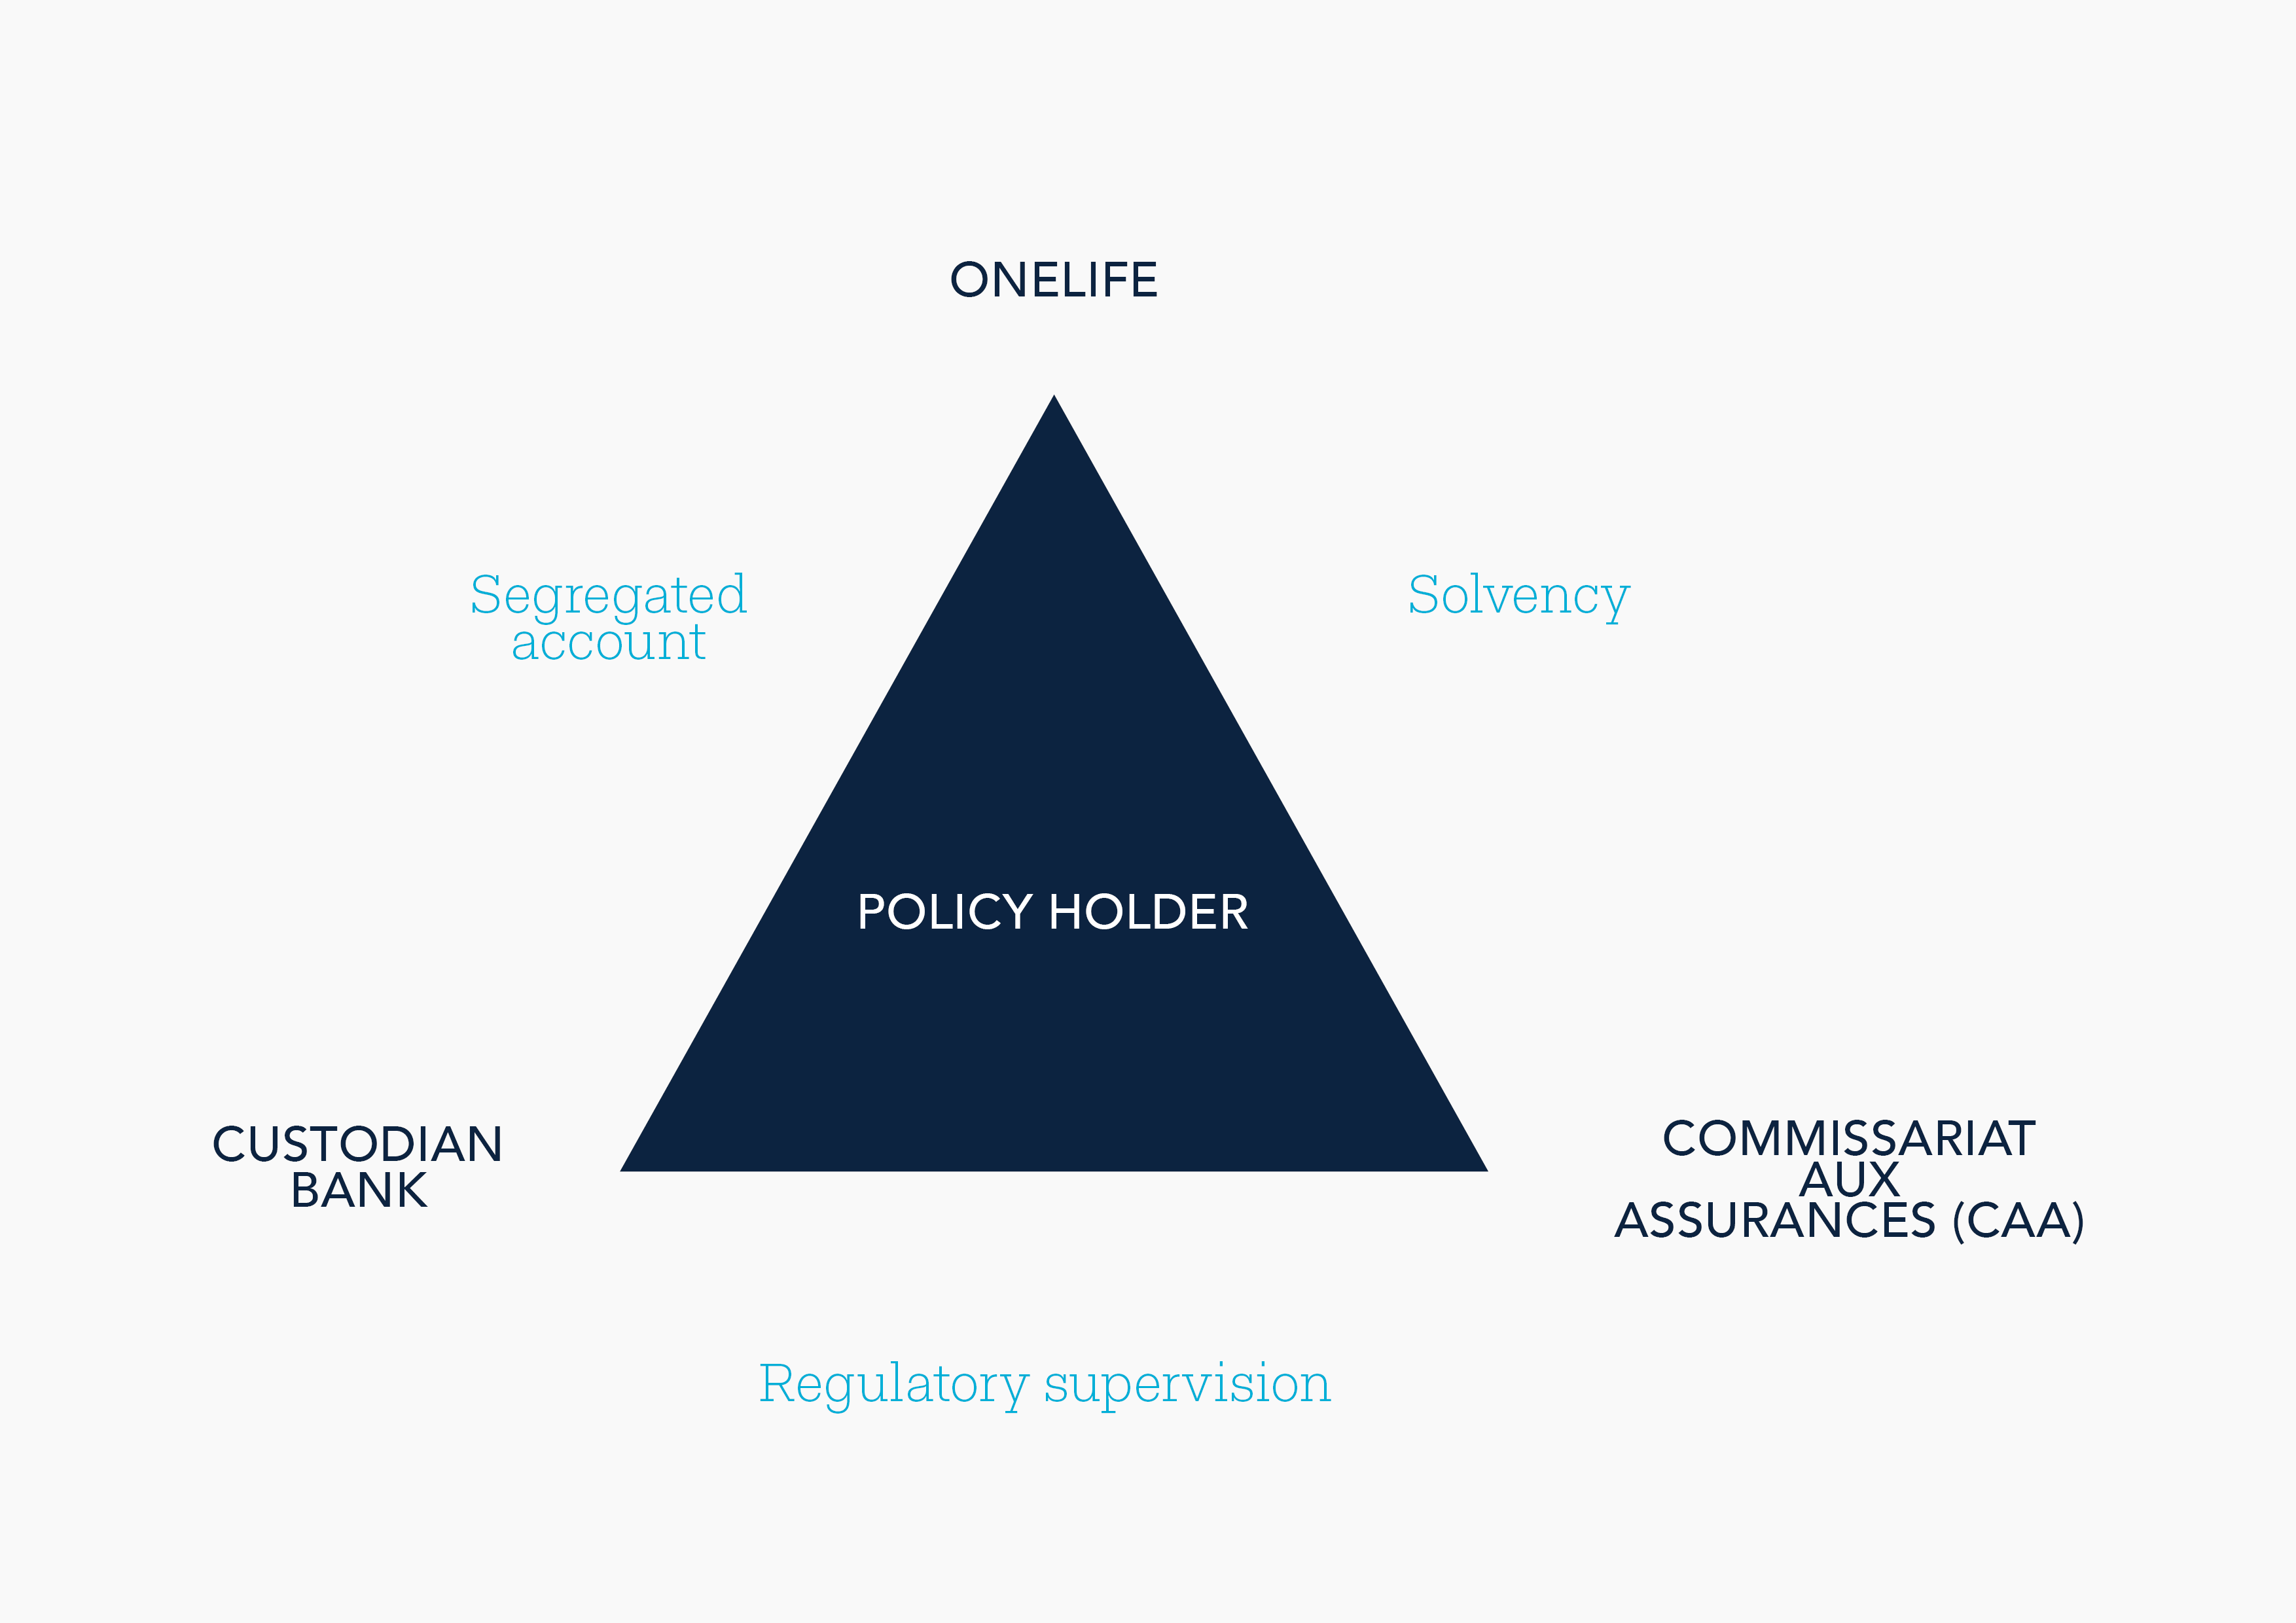 Luxembourg’s life assurance security triangle